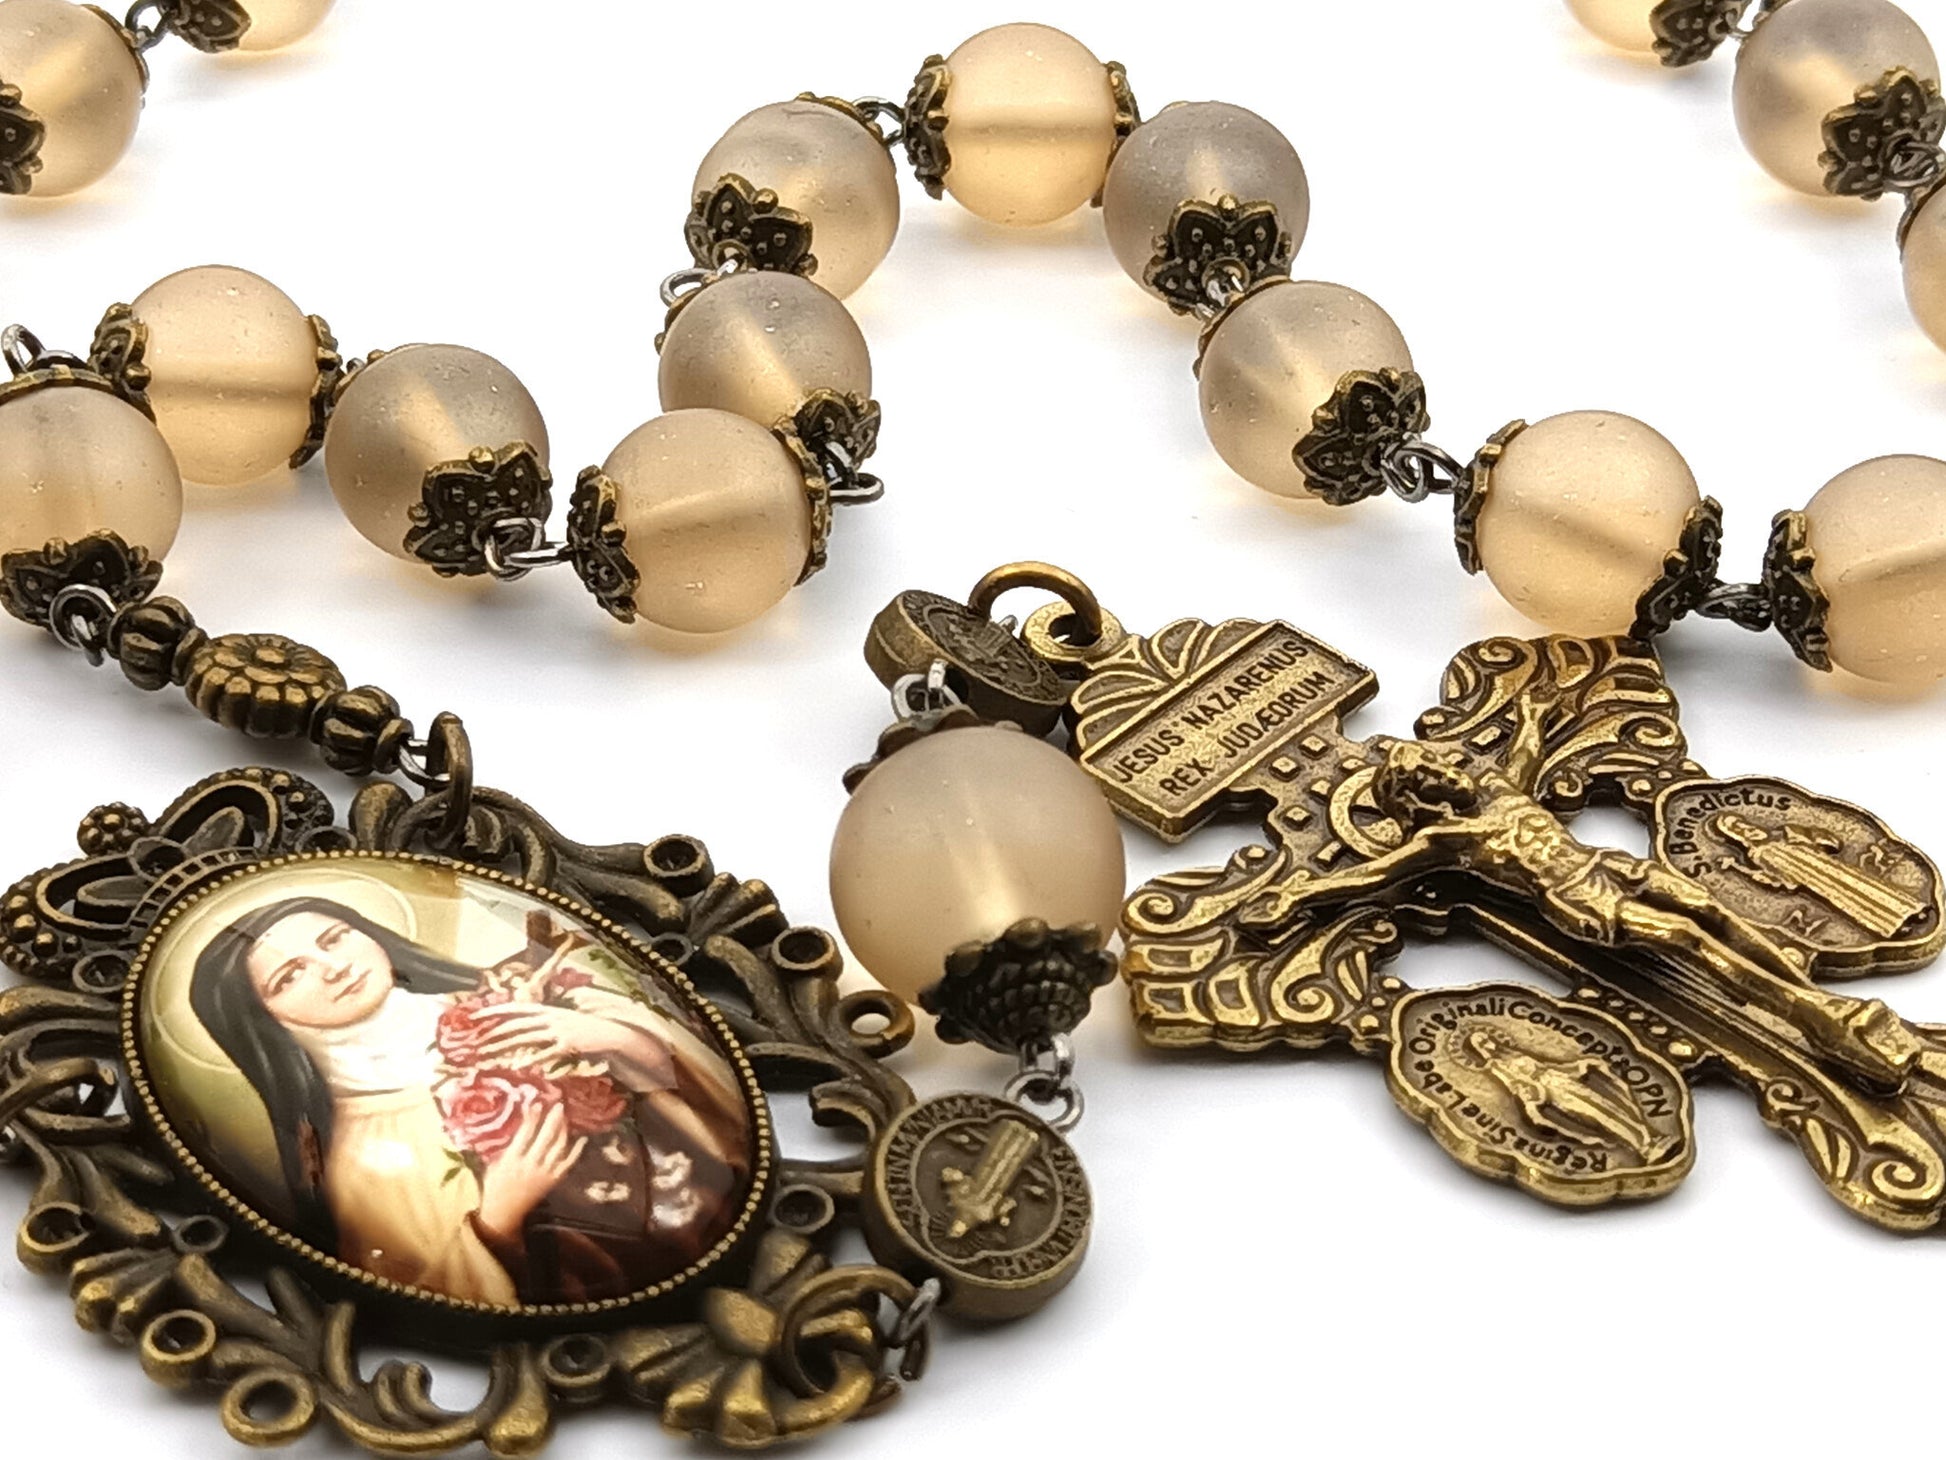 Saint Therese unique rosary beads prayer chaplet with glass beads, bronze Pardon crucifix and centre picture medal.